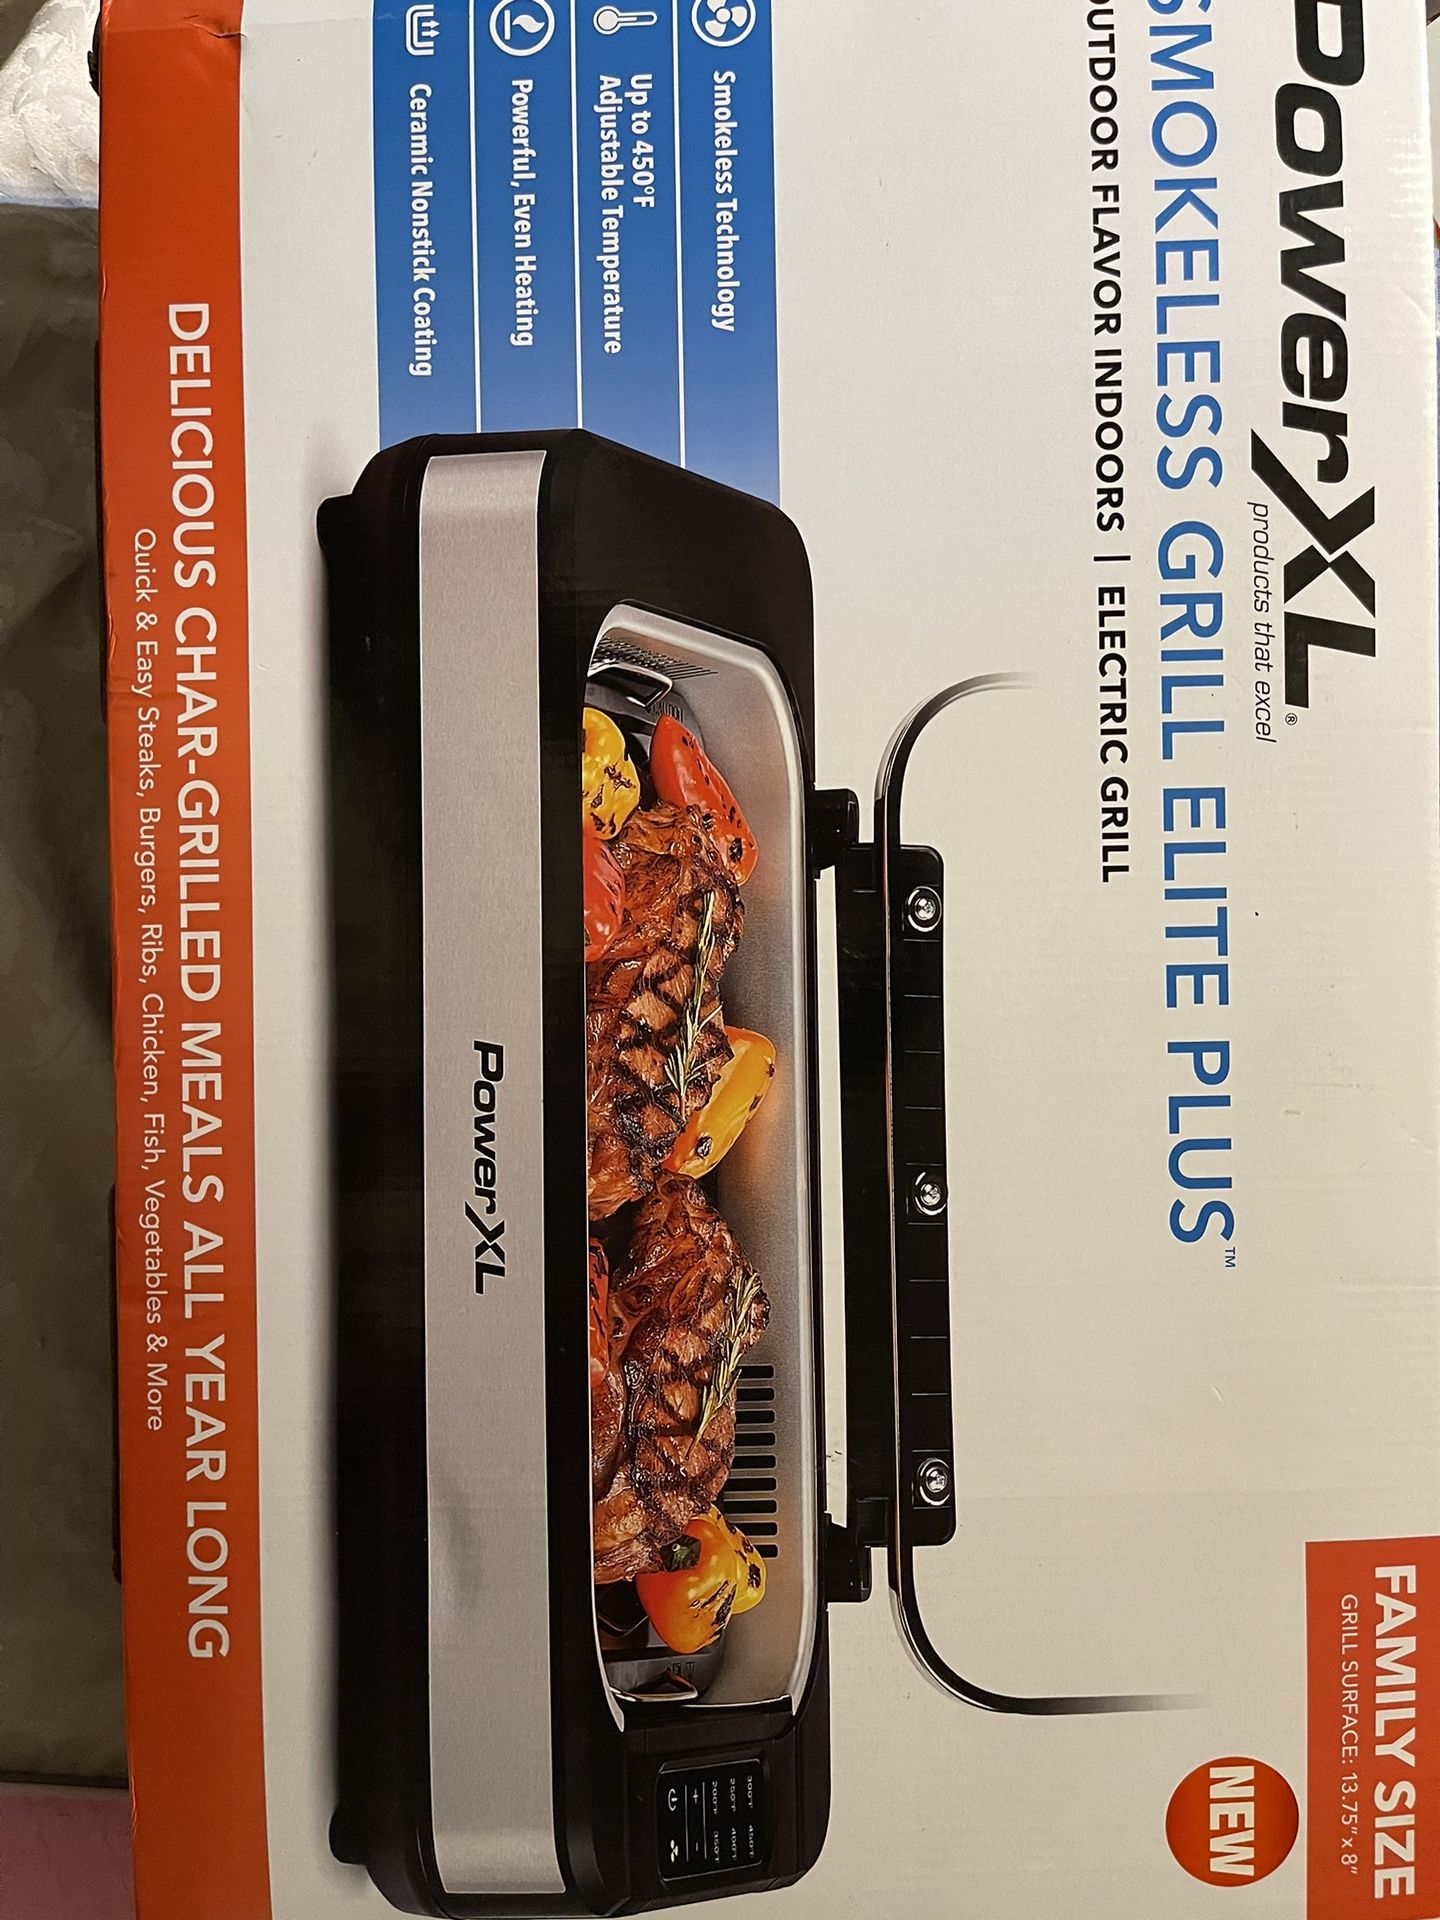 Power XL Smokeless Grill Elite Plus Indoor Electric Grill with Tempered Glass